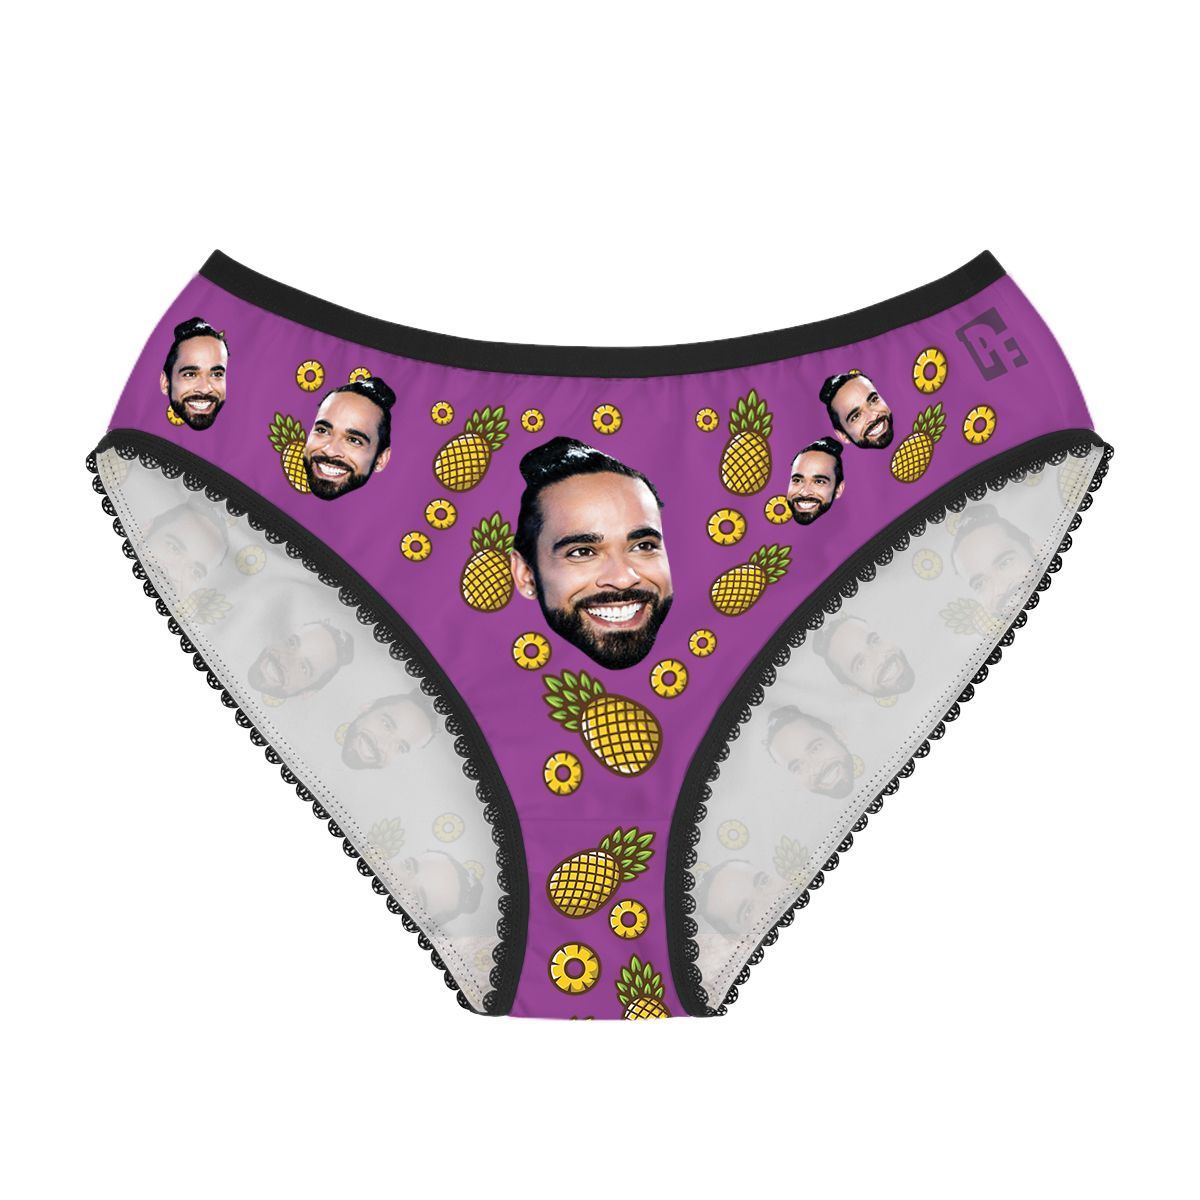 Purple Fruits women's underwear briefs personalized with photo printed on them